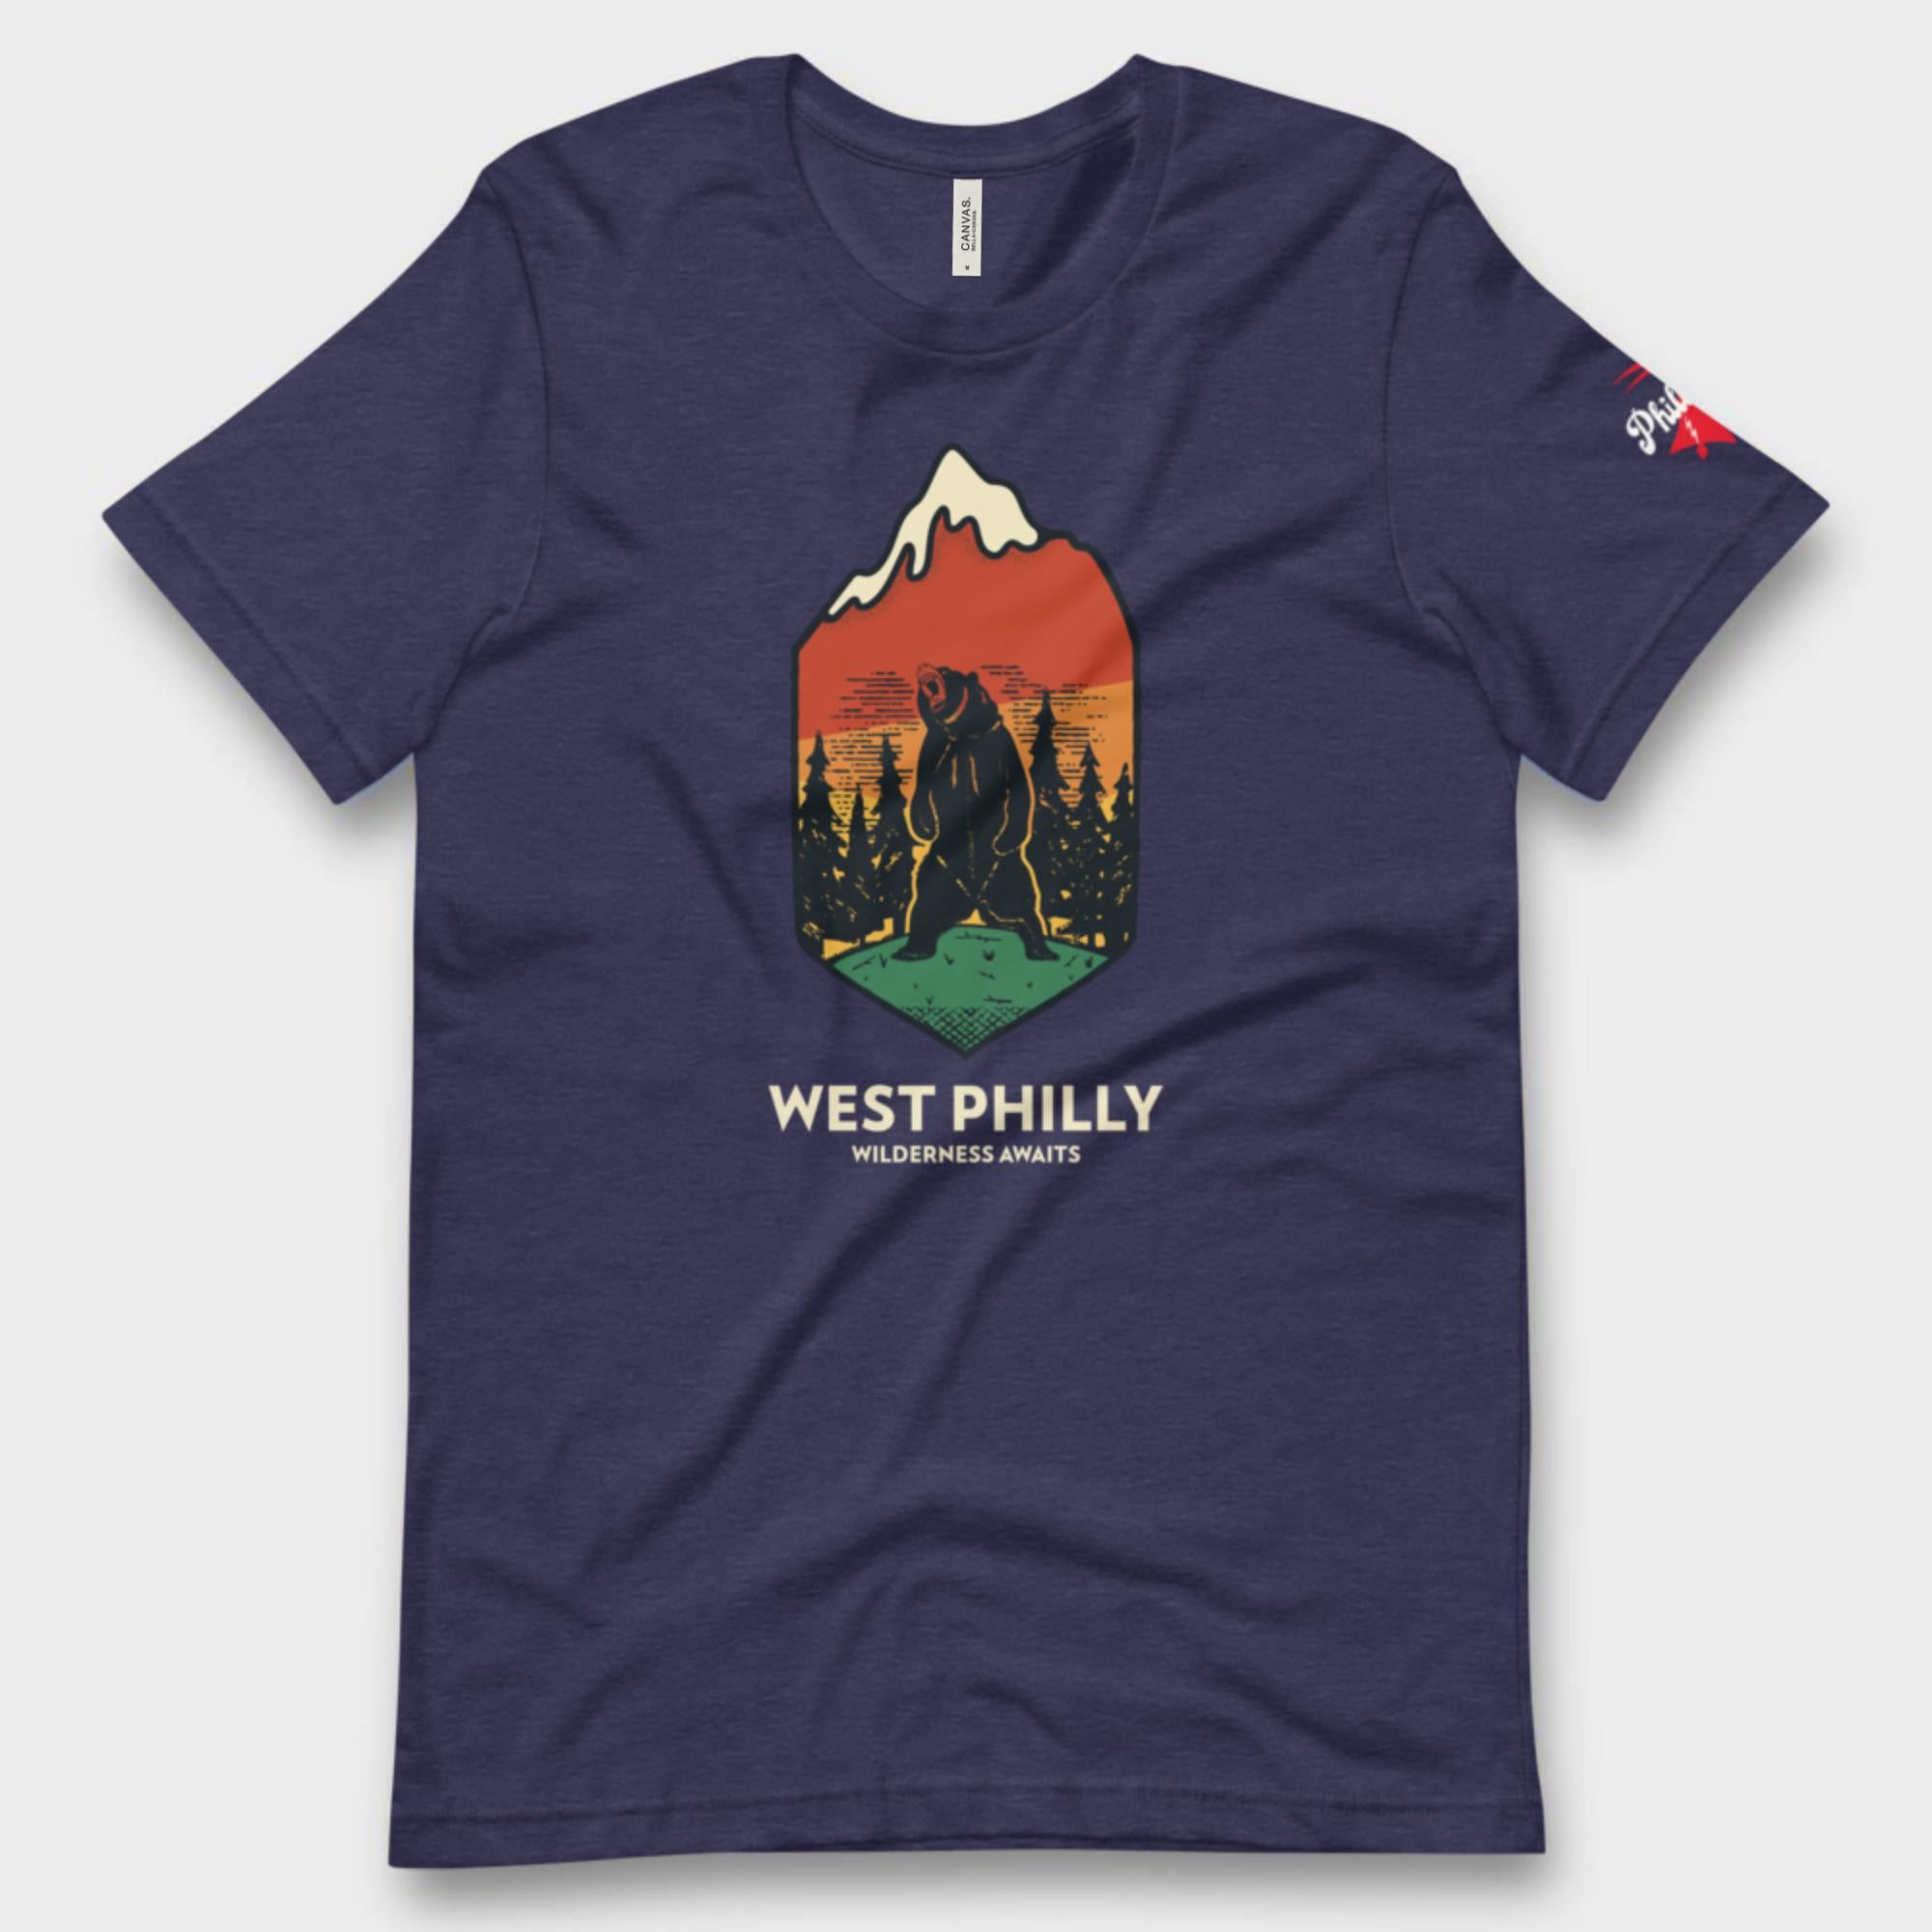 "West Philly Wilderness" Tee